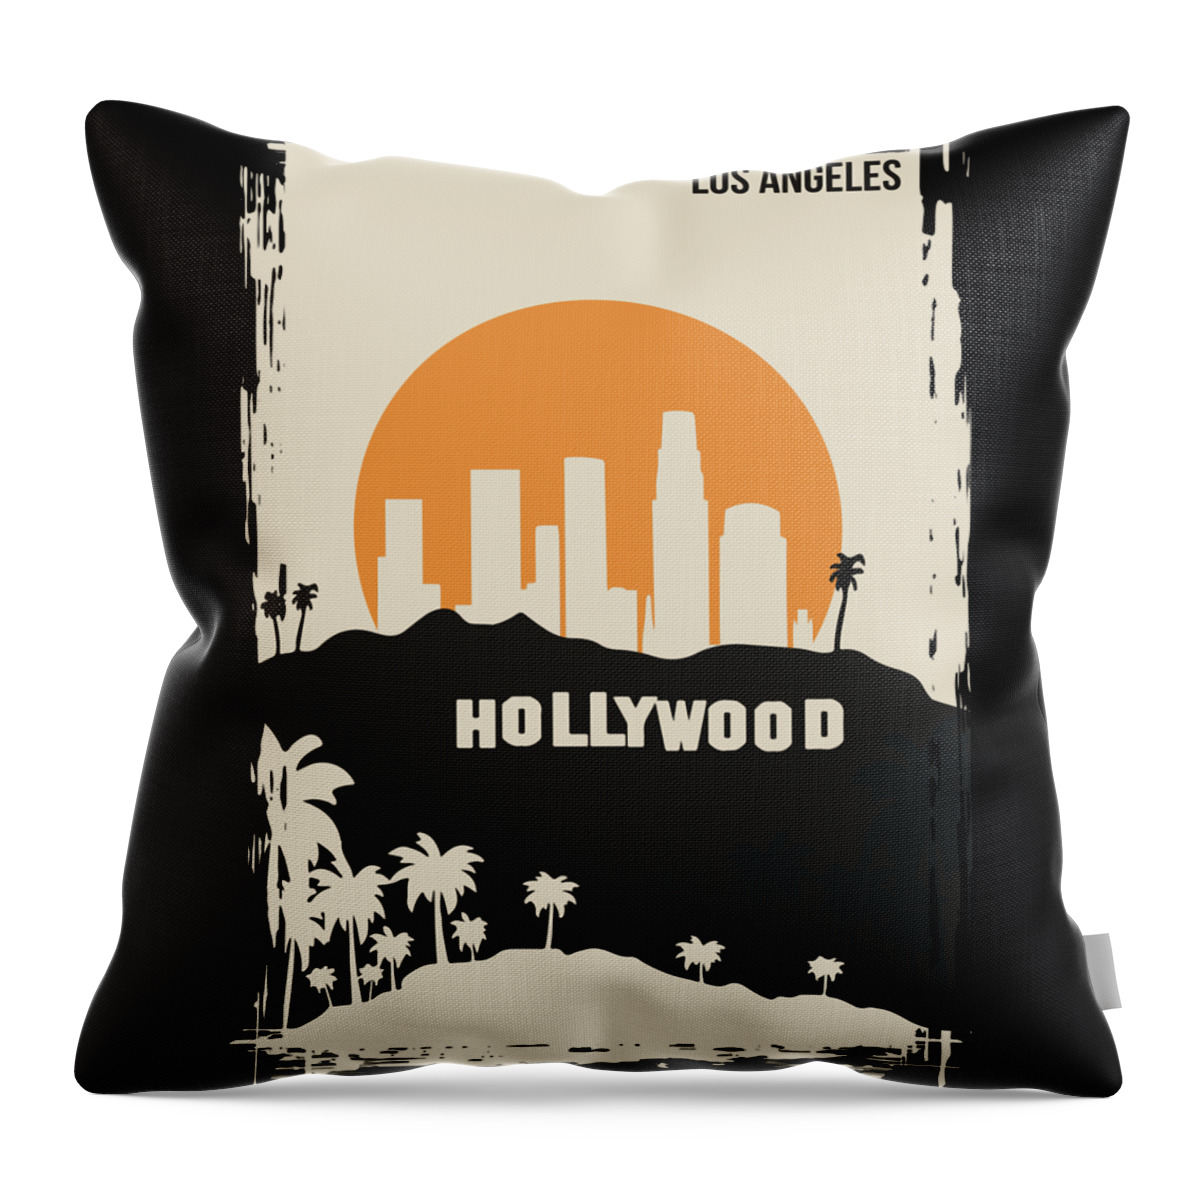 California Throw Pillow featuring the digital art Los Angeles Hollywood Minimal Travel Poster by Lotus Leafal